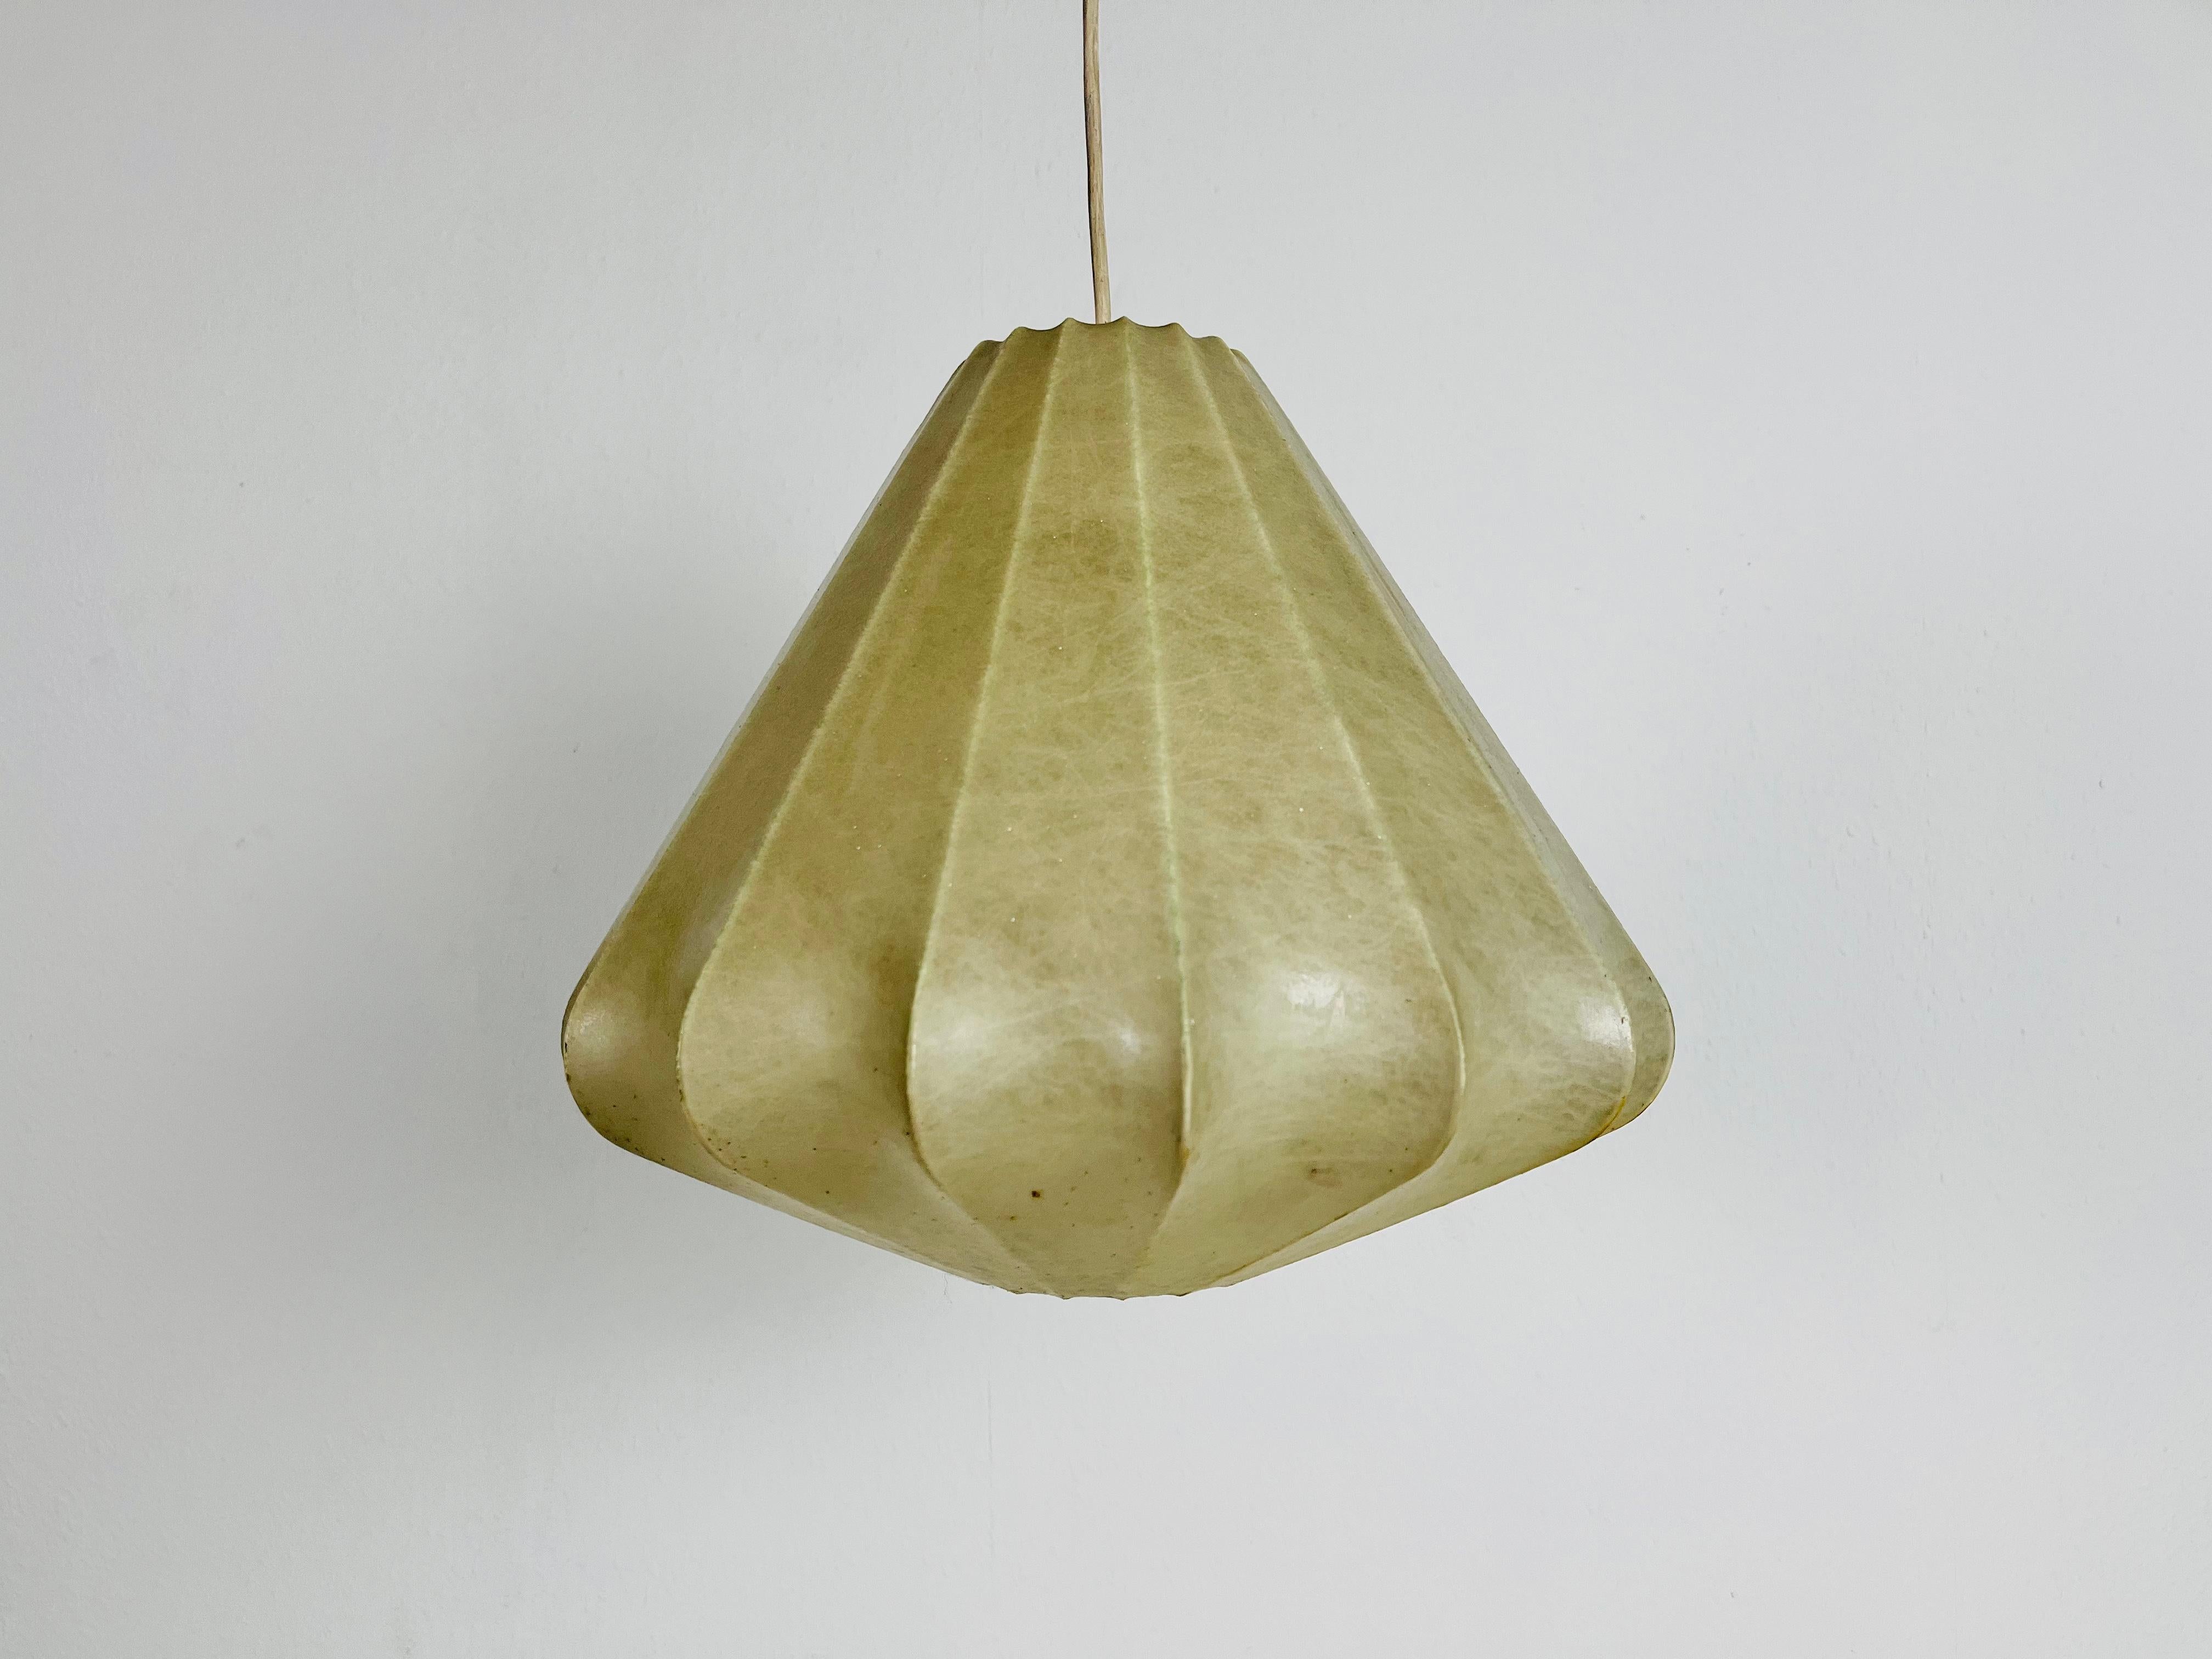 A cocoon pendant lamp made in Italy in the 1960s. The hanging lamp has been manufactured in the design of the lamps made by Achille Castiglioni. The lamp shade is of original cocoon and has an organic shape. 

Measures: Max height: 33-75